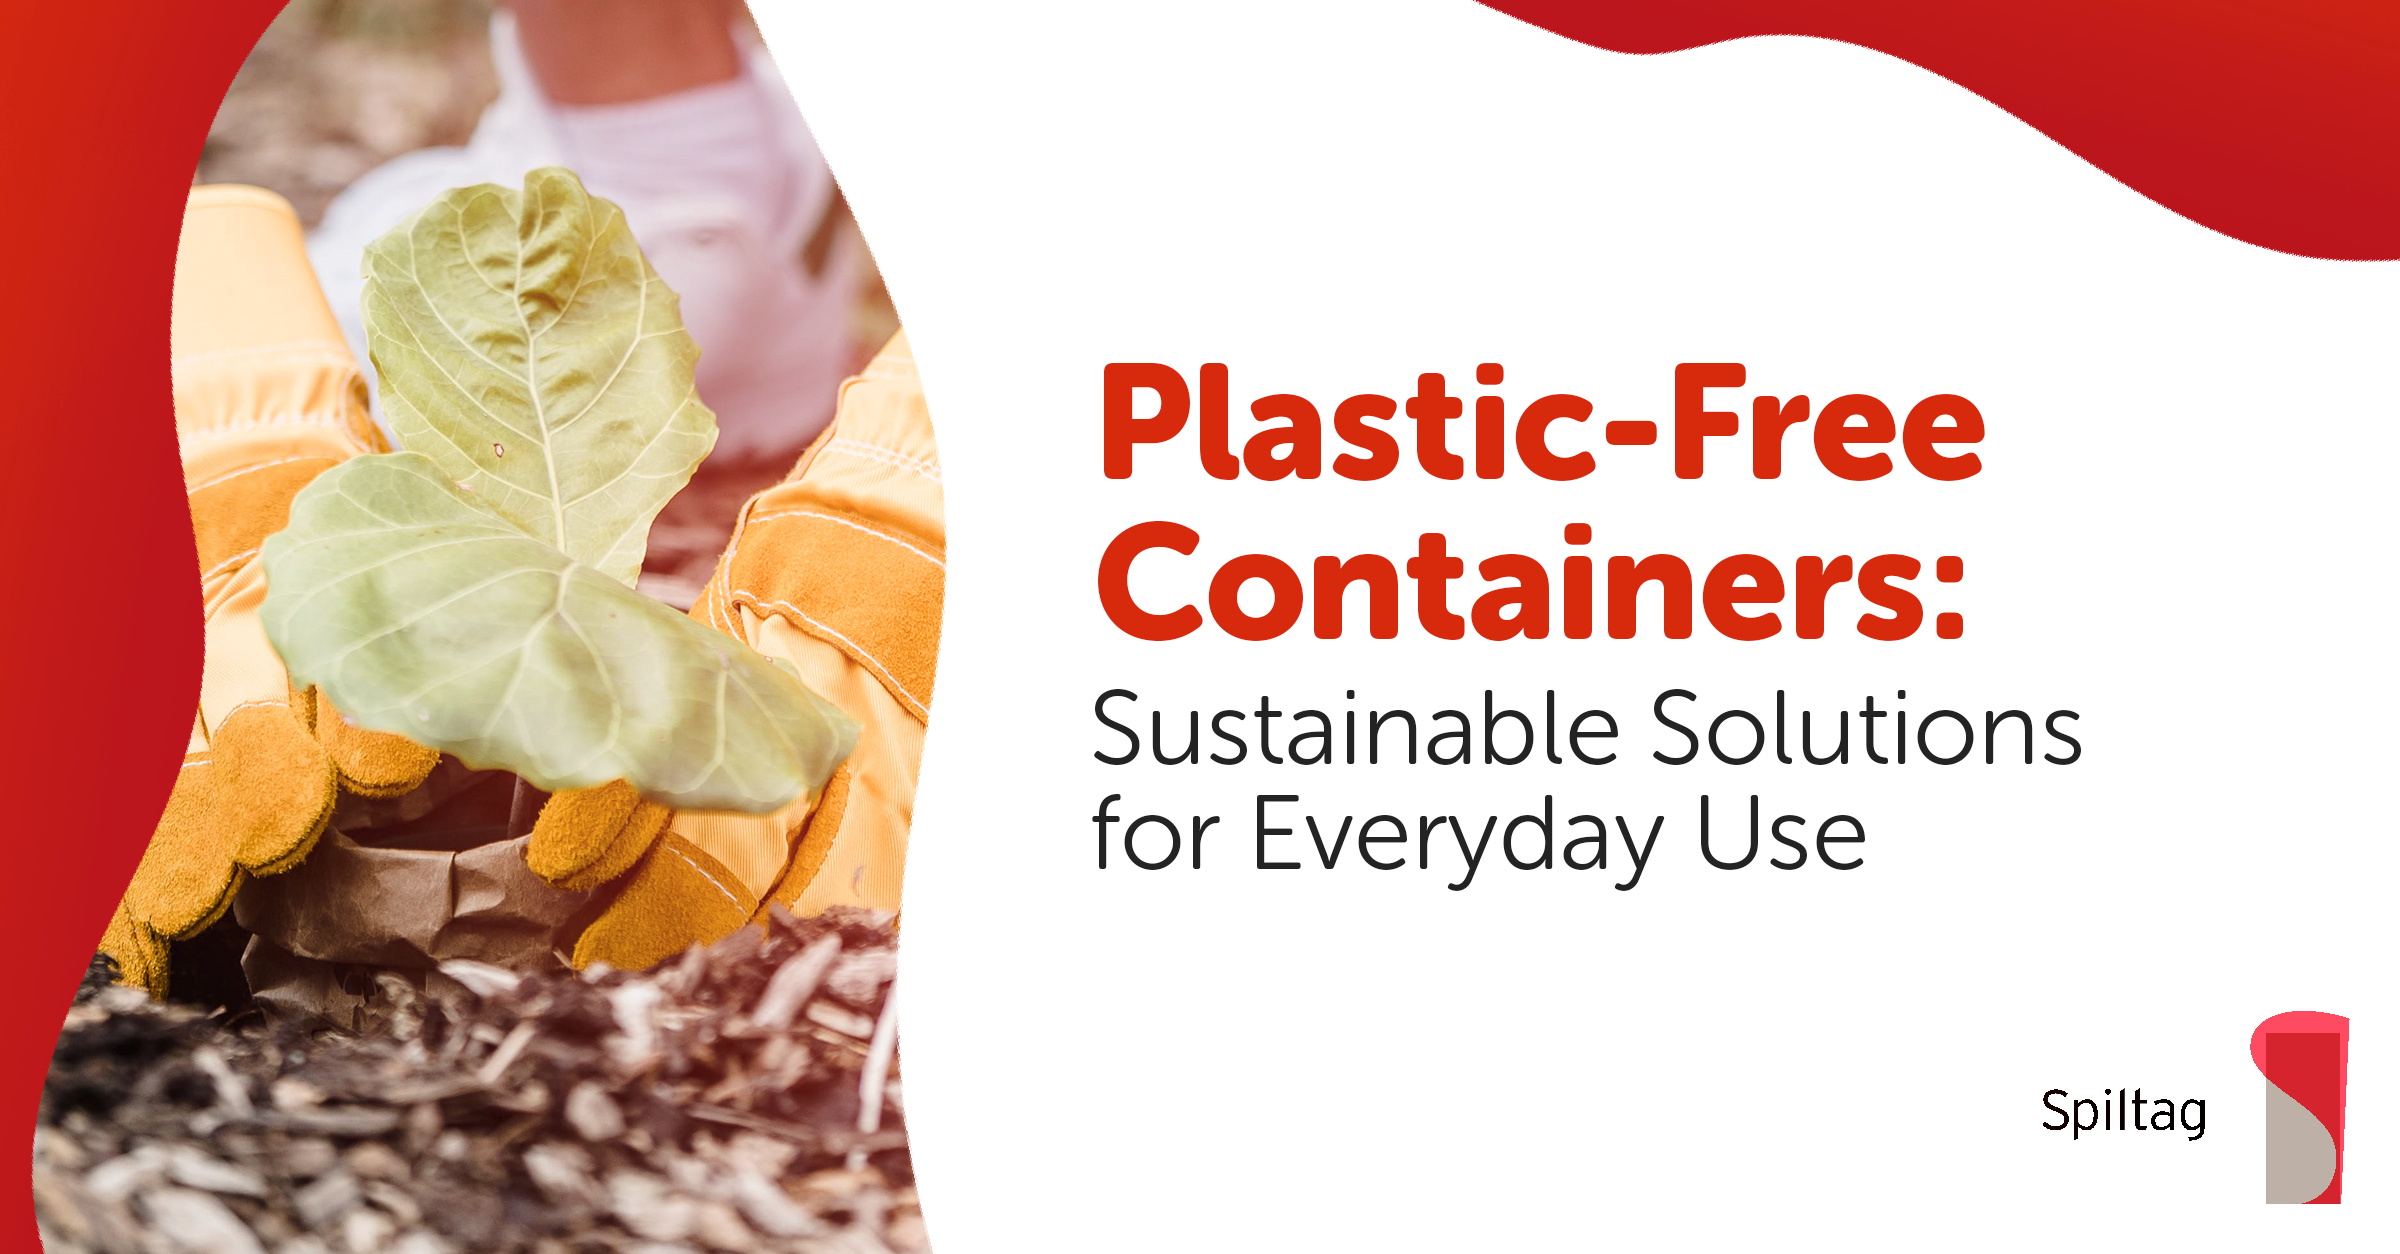 Plastic-Free Containers